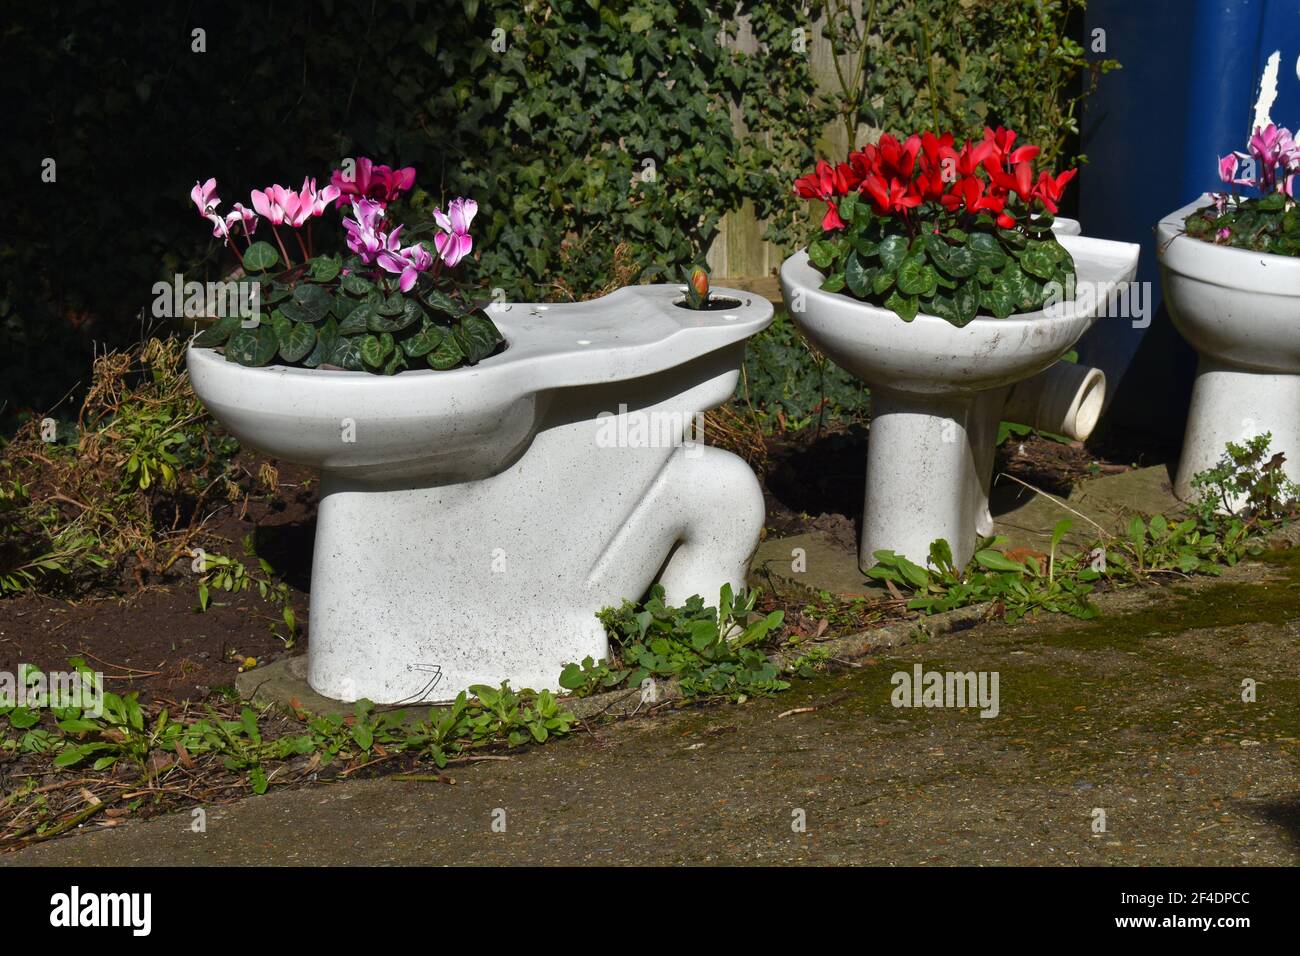 Turning toilet into planter is effective recycling project It is heavy so will not blow over in strong wind Neighbour may object to toilets on display Stock Photo